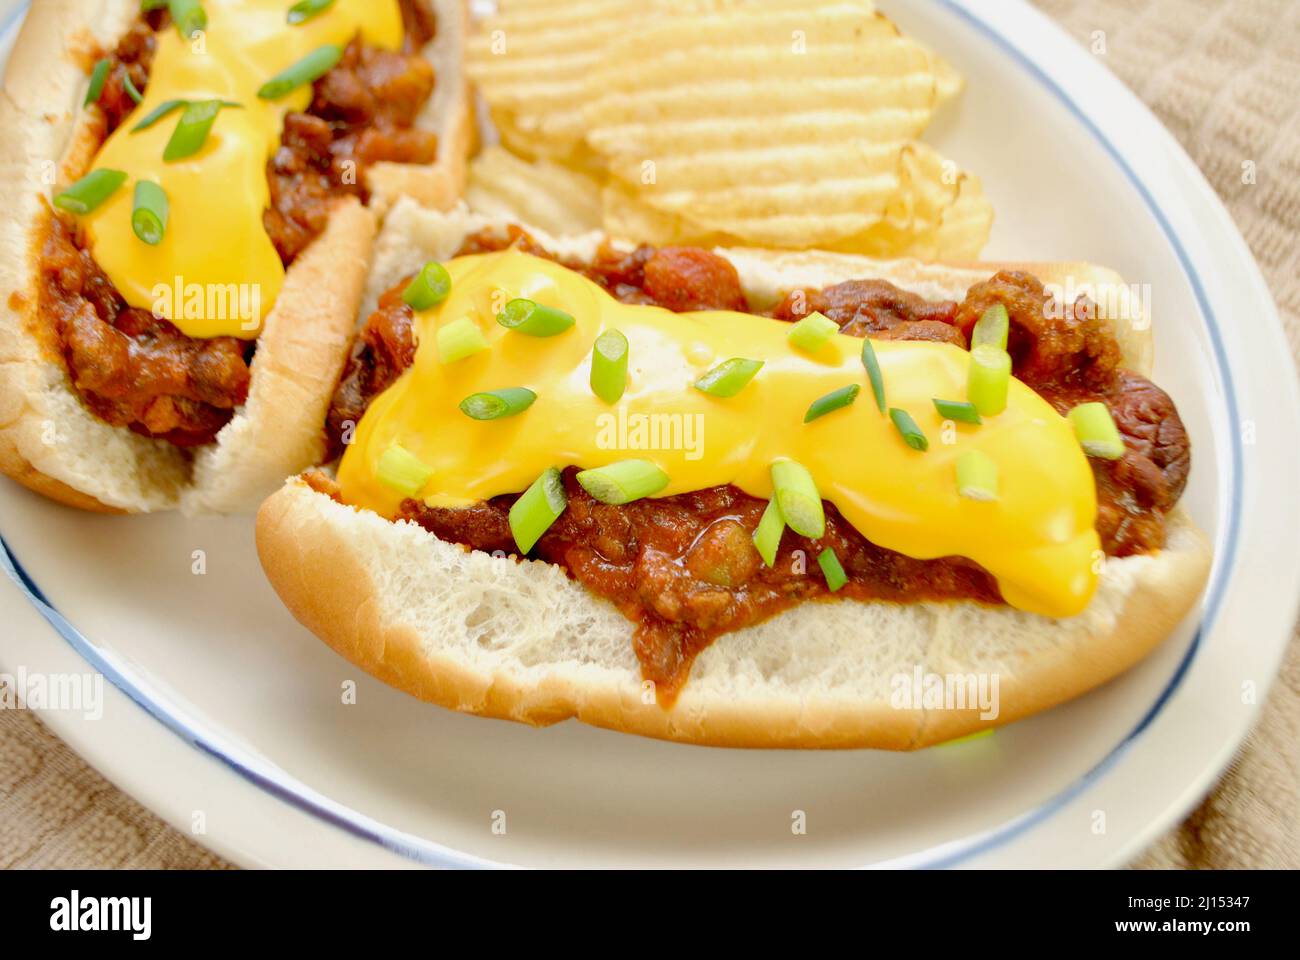 Loaded Chili Dog with Cheddar Cheese and Scallion Served with Wavy Potato Chips Stock Photo